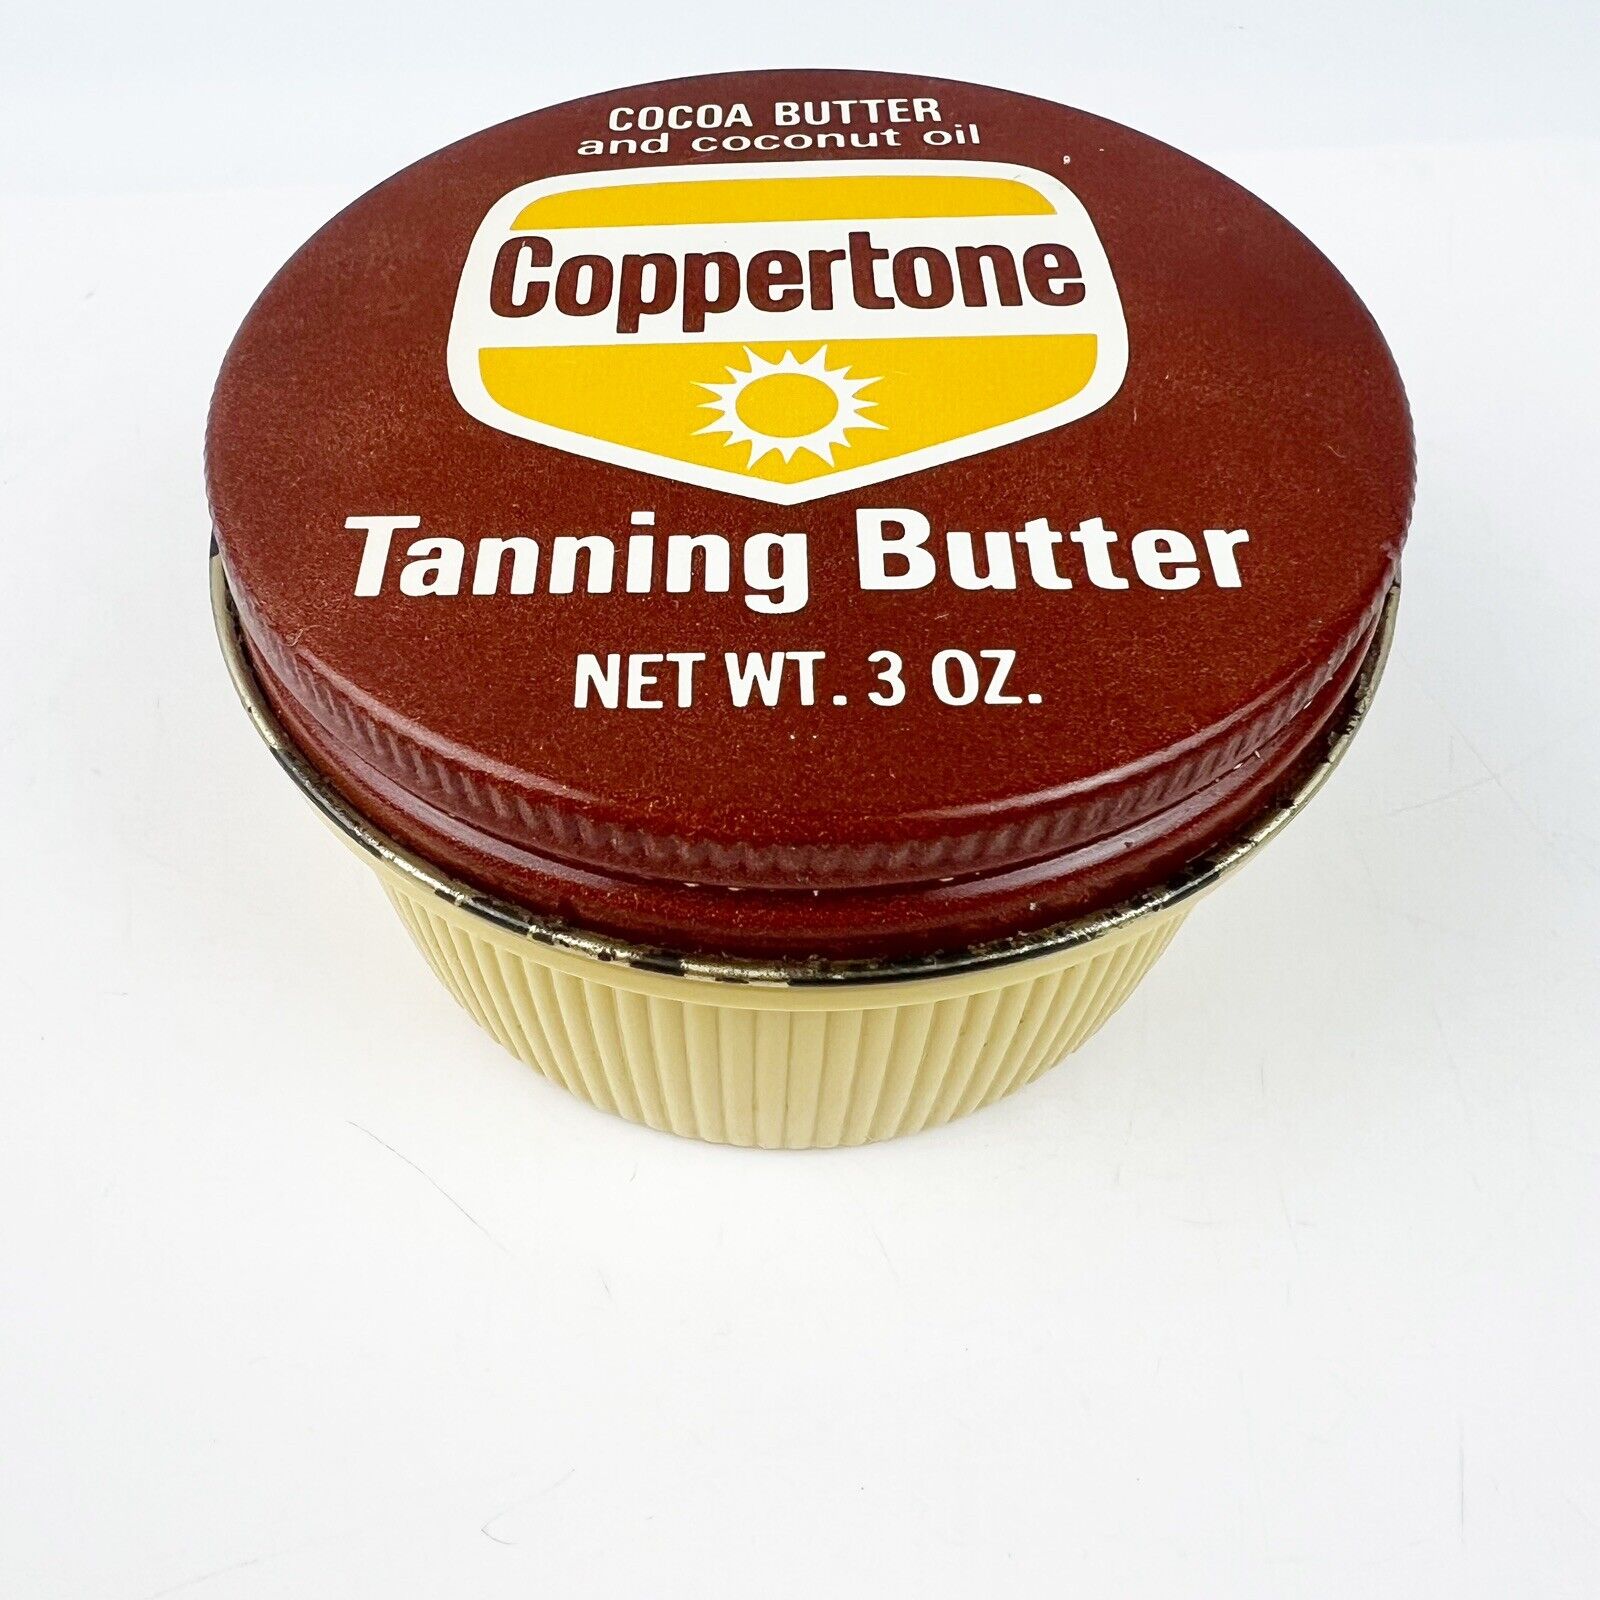 NEW Vintage 1970s Coppertone Tanning Butter Cocoa Butter & Coconut Oil 3 oz